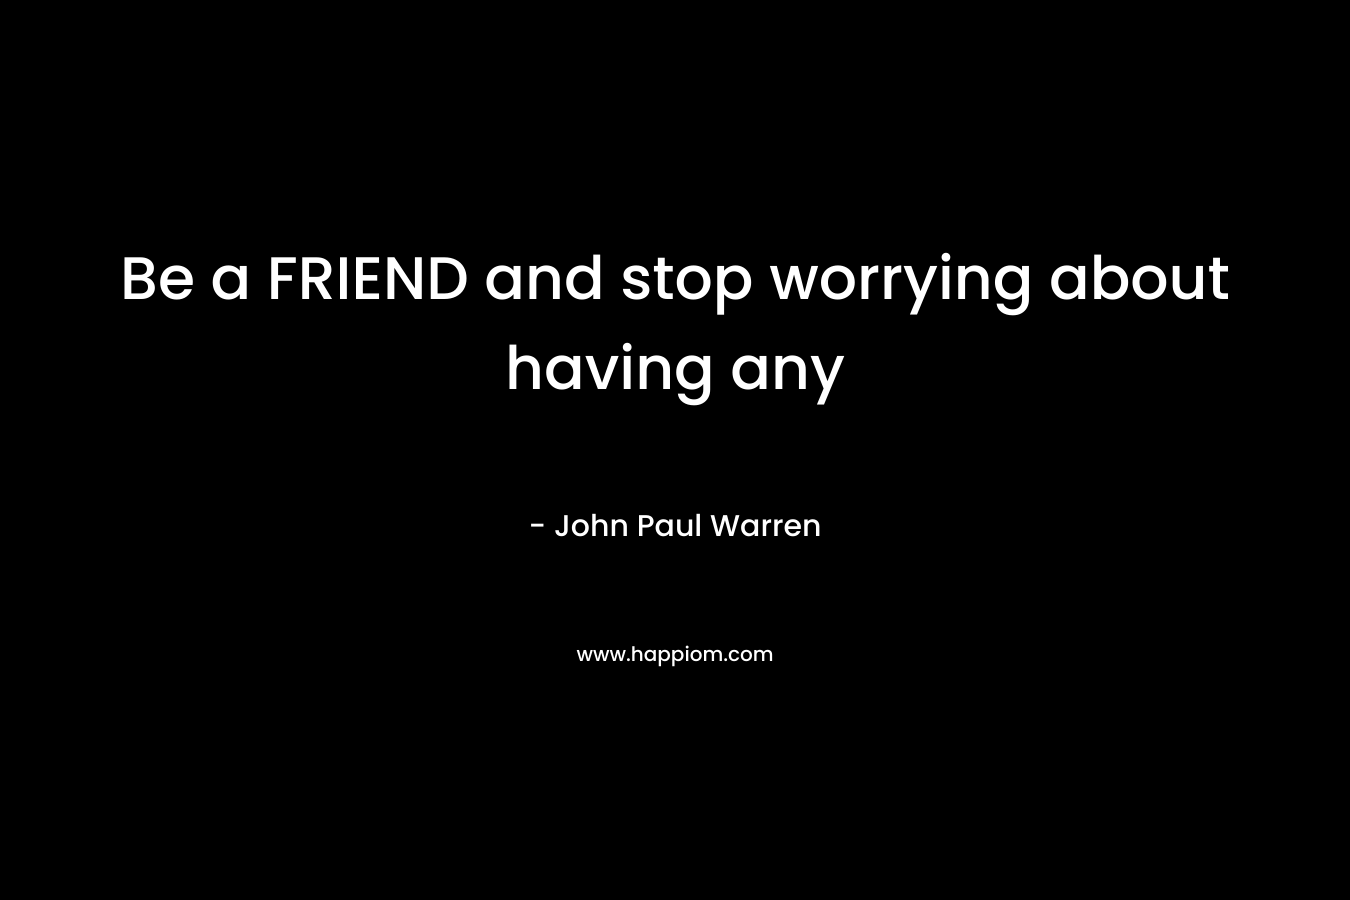 Be a FRIEND and stop worrying about having any